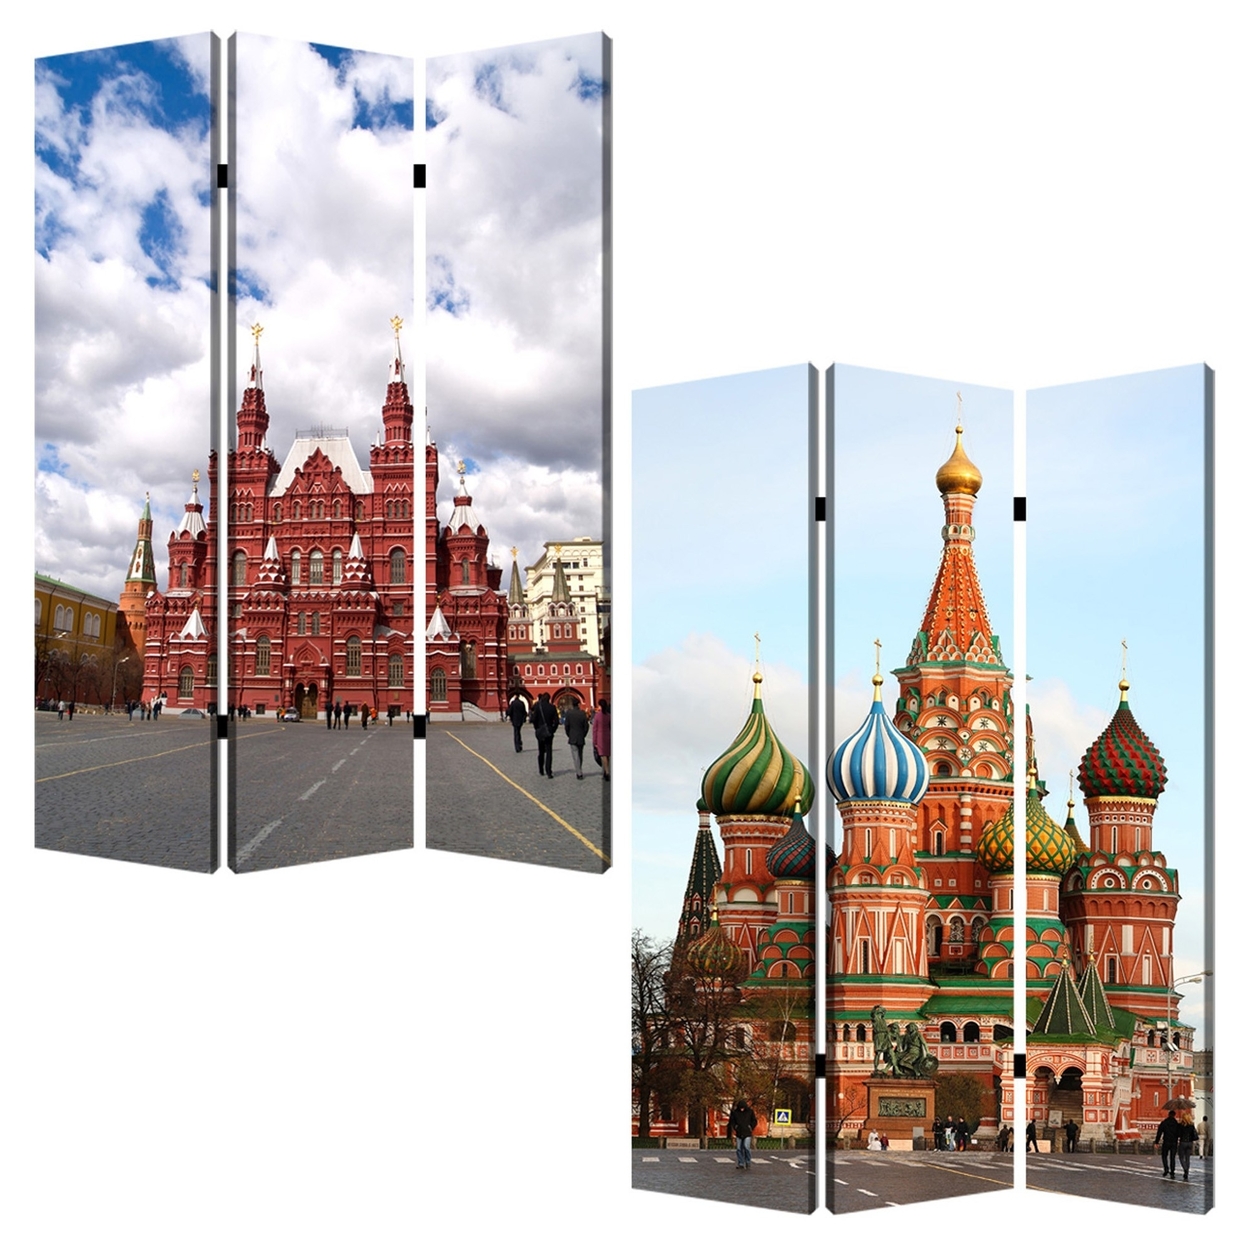 Russian Tower Print Foldable Canvas Screen With 3 Panels, Multicolor- Saltoro Sherpi